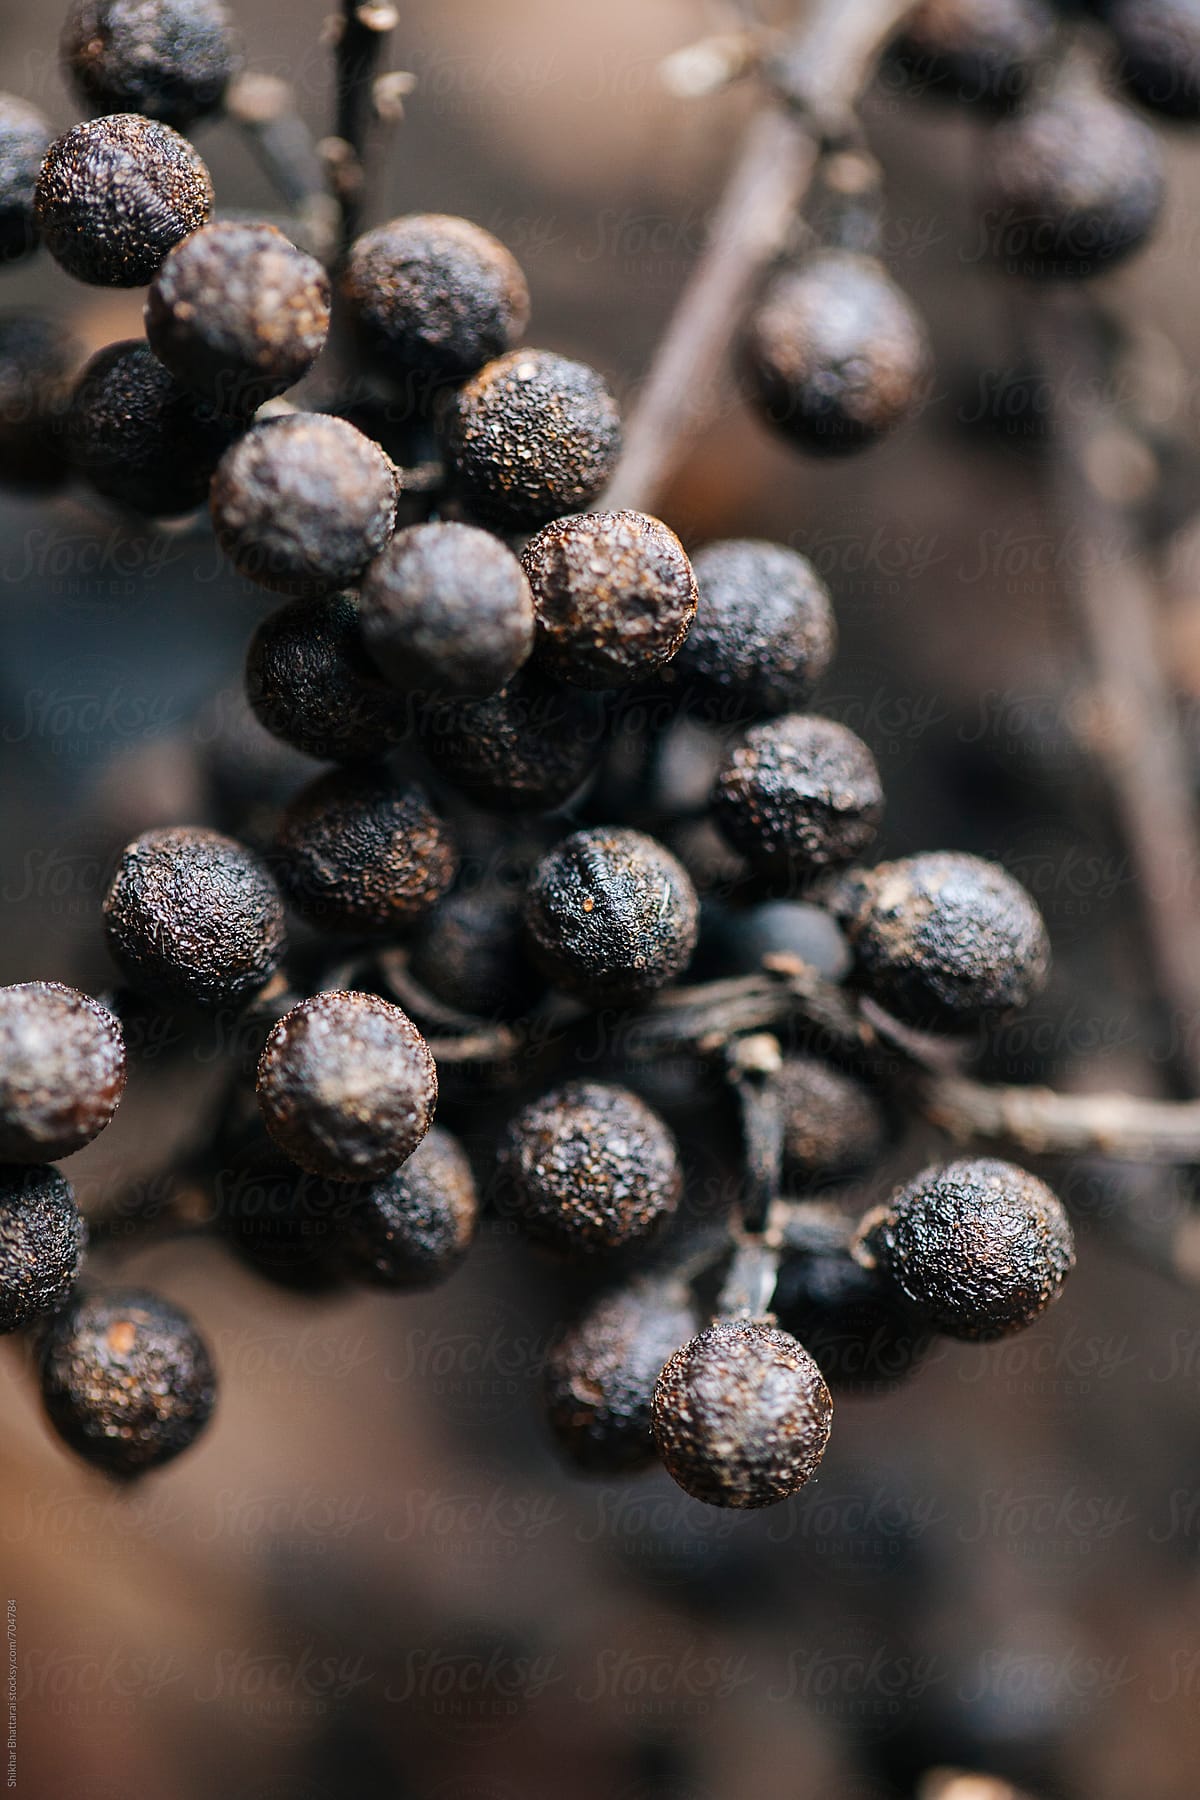 Himalayan spice known as Timur/Tejpal/Sichuan pepper